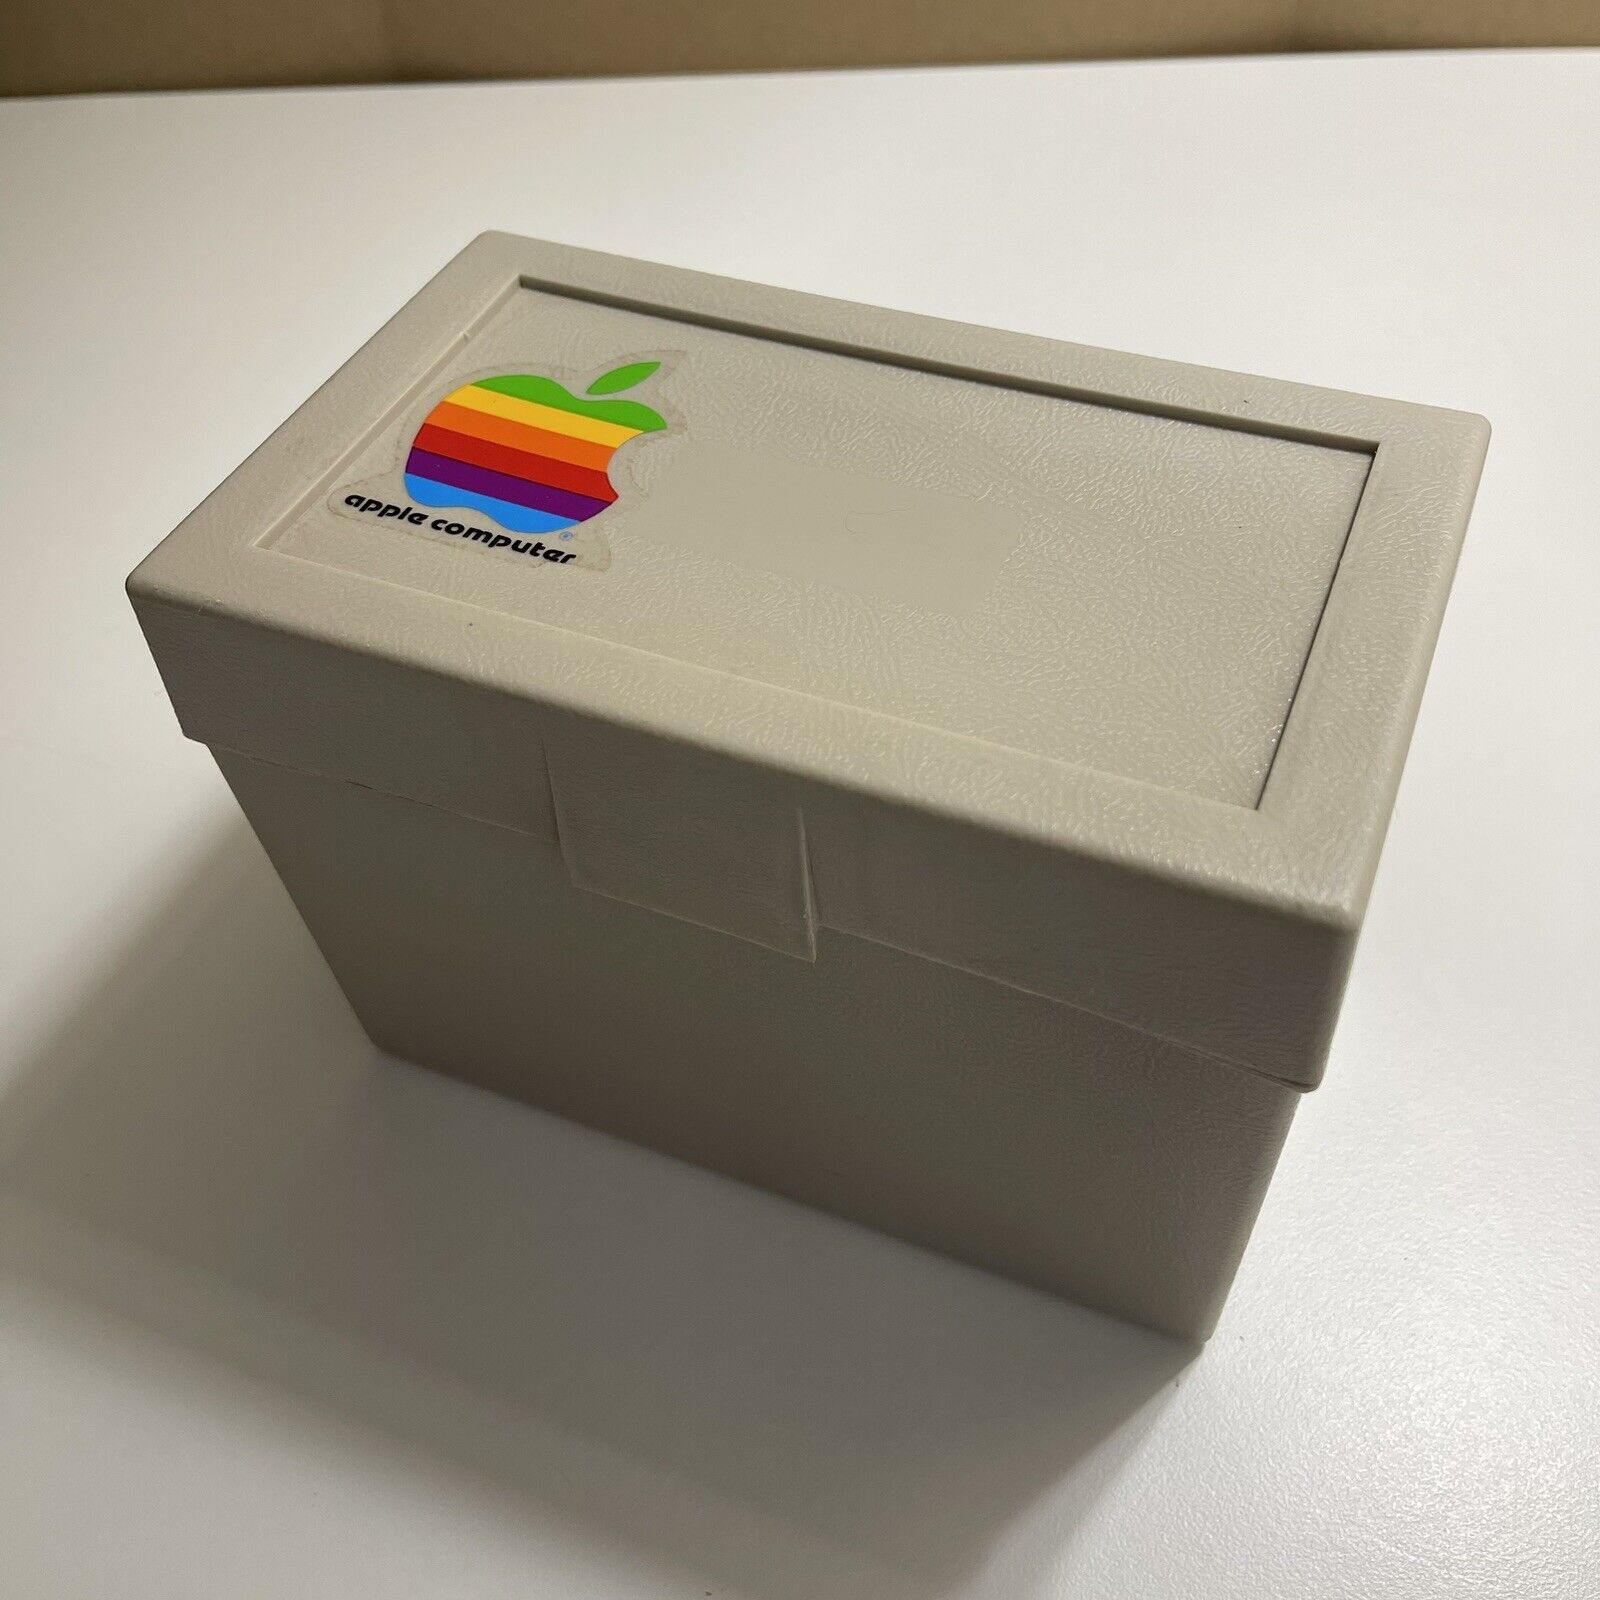 Vintage Apple Computers 1984 File Index Card Box Container 1980s Employee Office